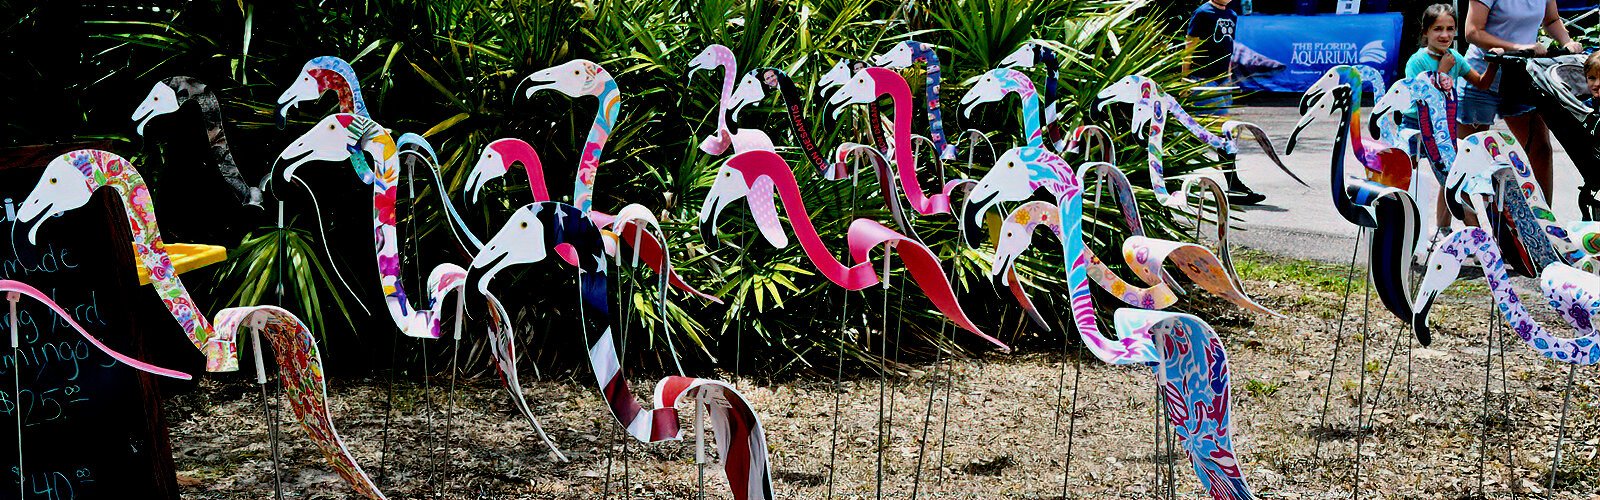 Ready to decorate your garden are the delightful bouncing flamingos made of PVC by Amber Montsdesca, owner of Wicked Green Organic & Hydroponic Gardening Supplies in Spring Hill.